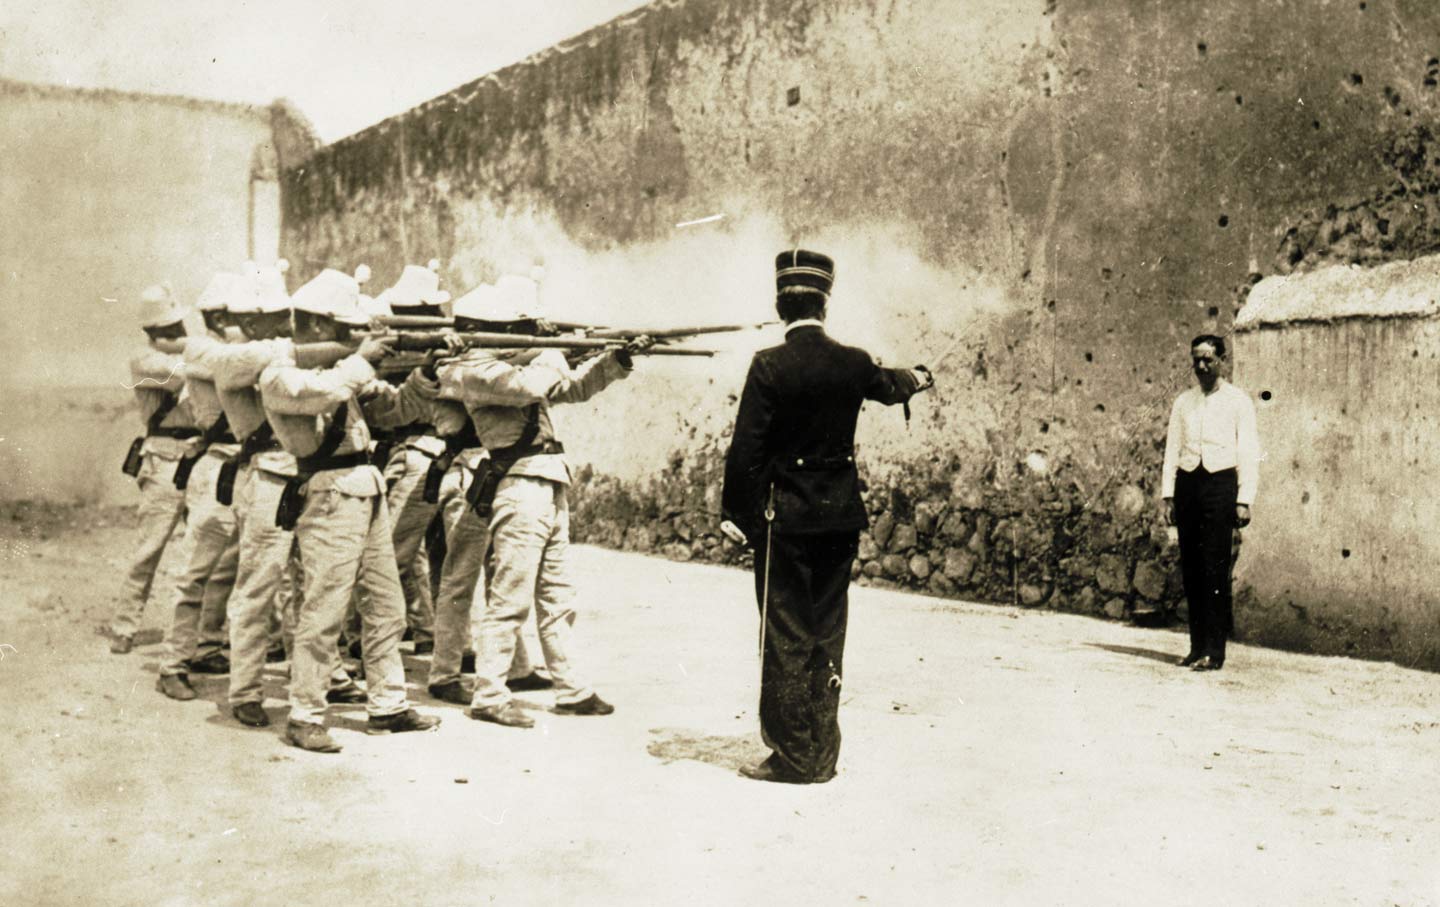 A Few Words for the Firing Squad